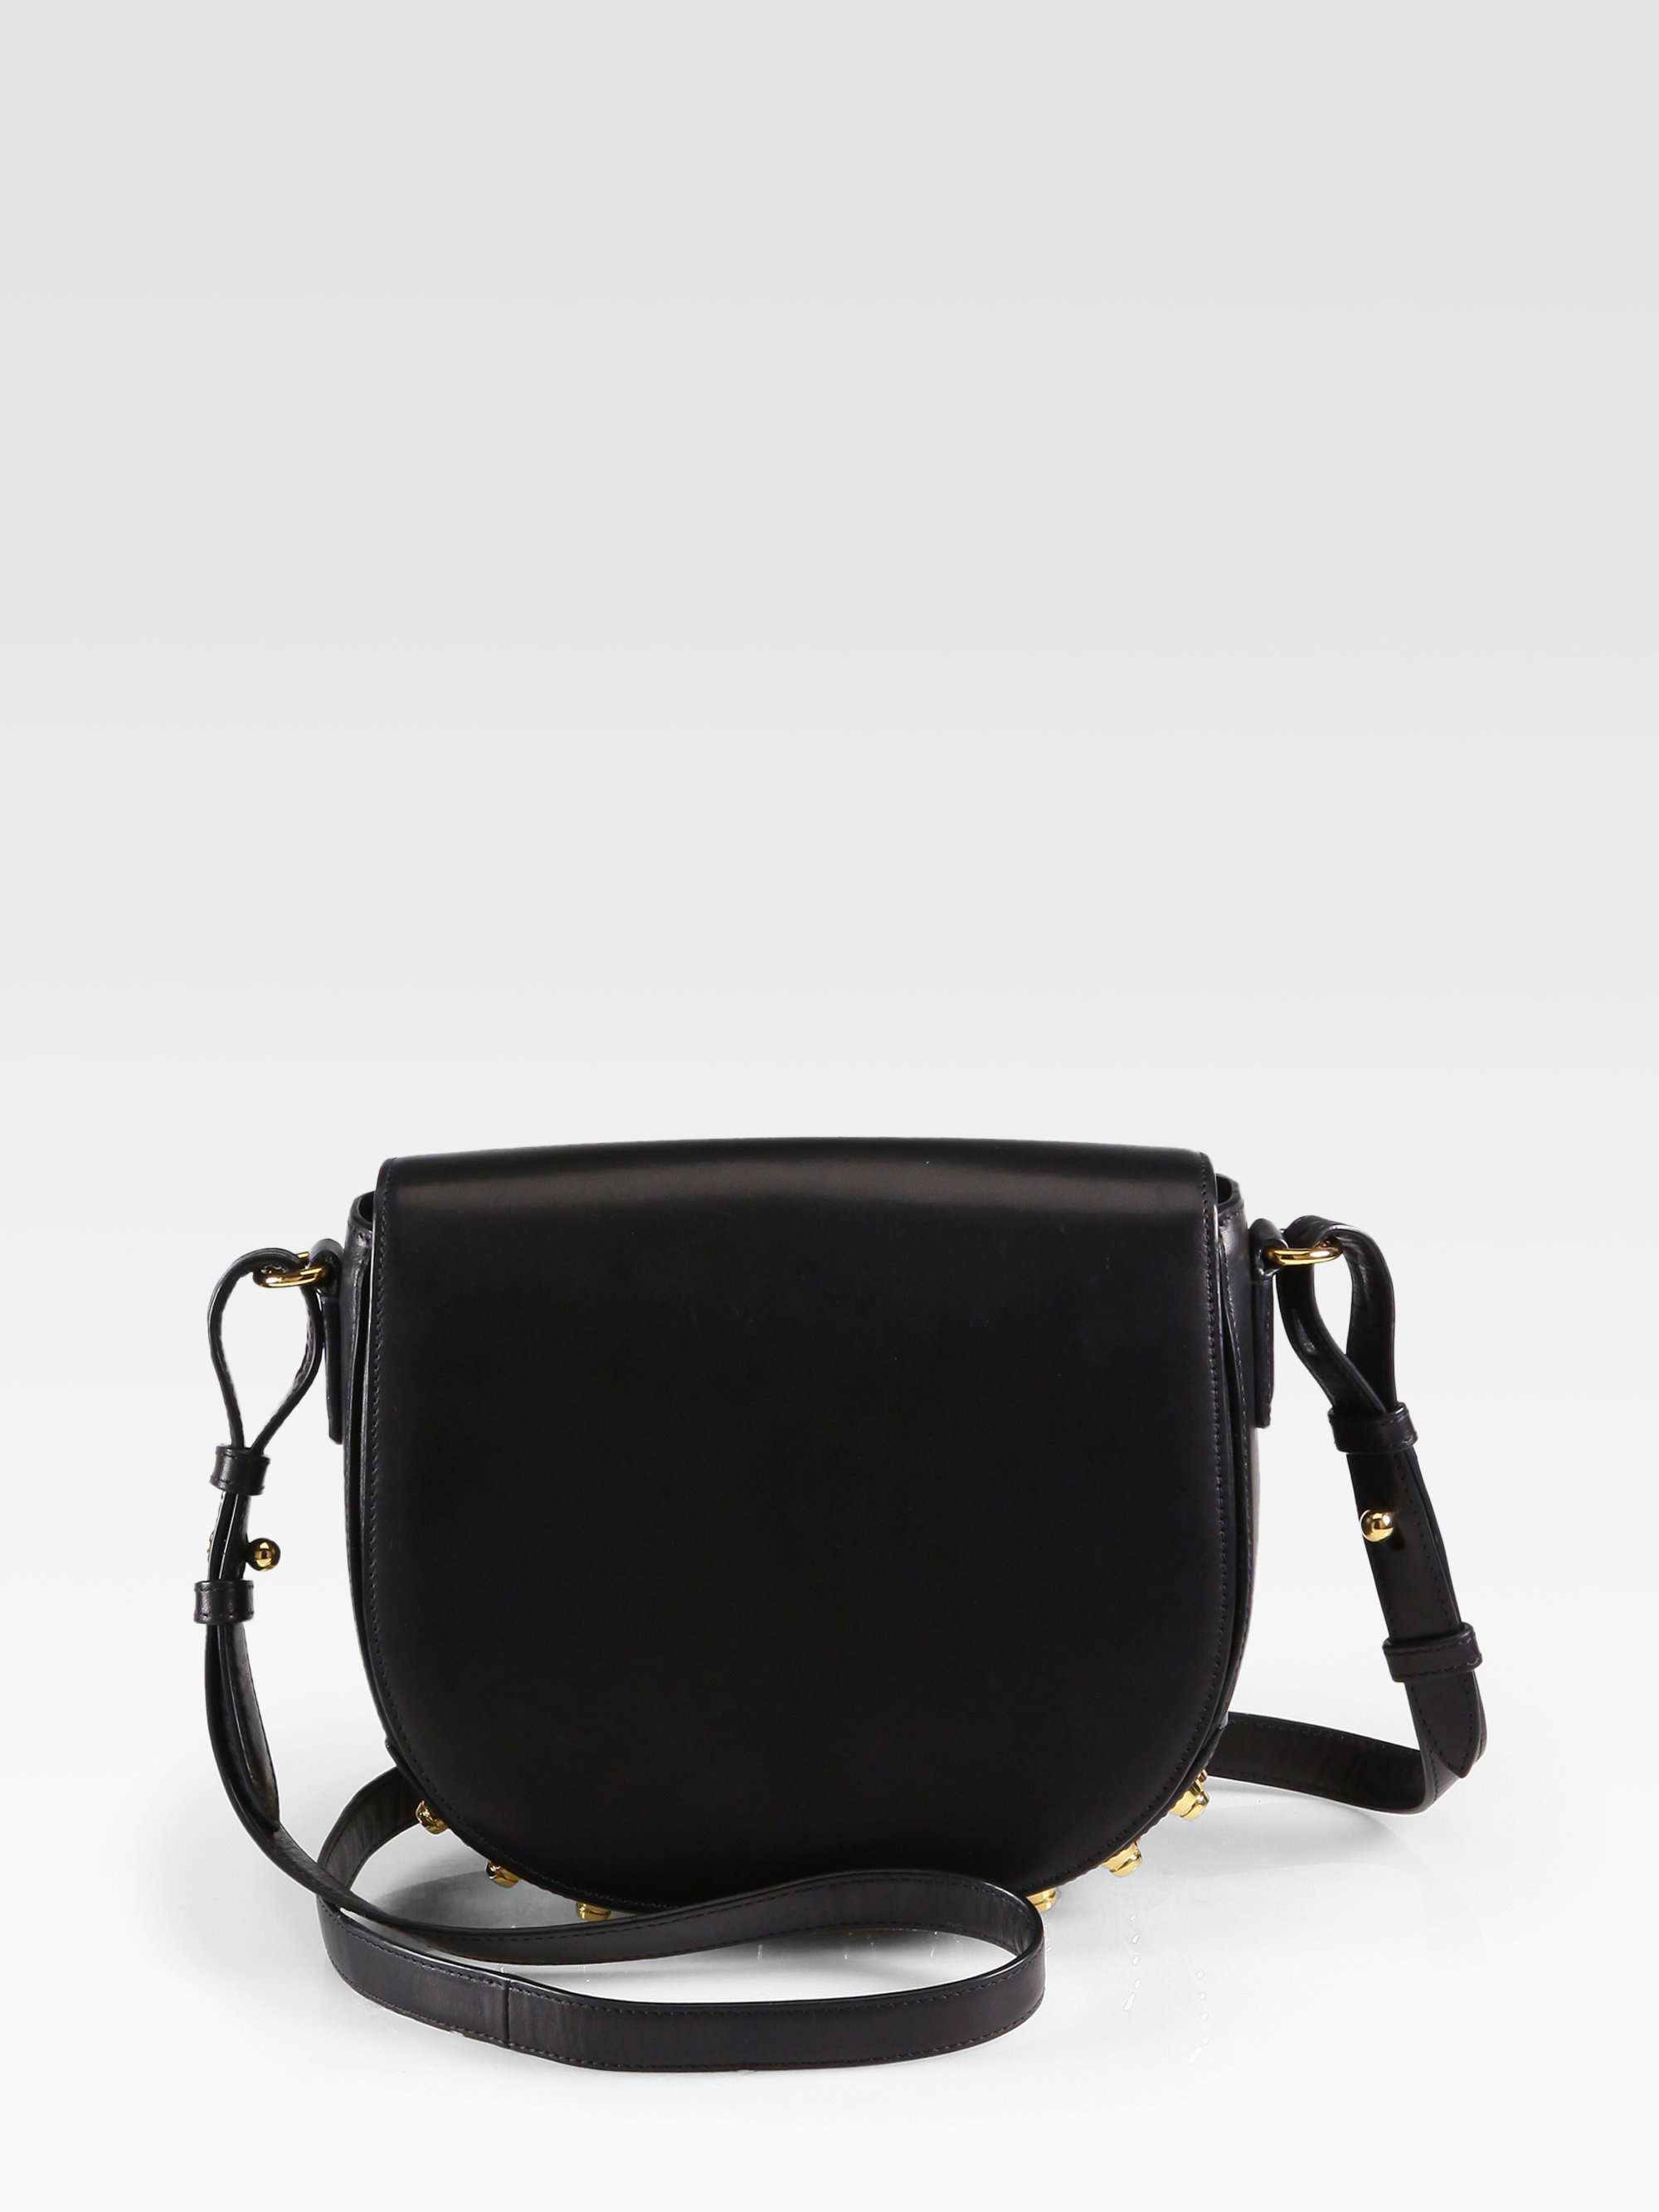 Alexander Wang Lia Small Leather Shoulder Bag in Black - Lyst